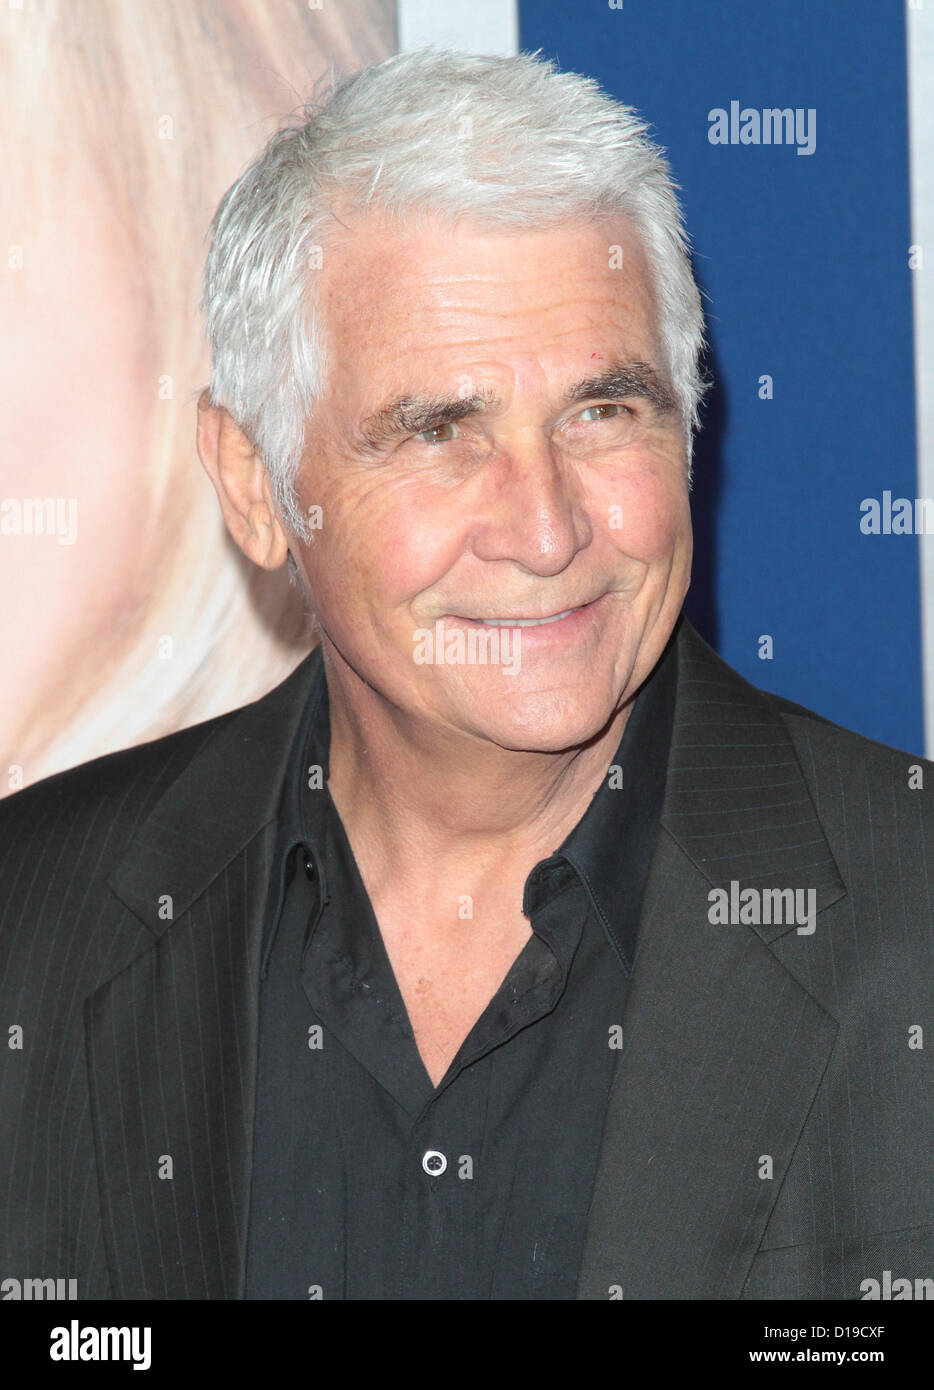 JAMES BROLIN LOS ANGELES PREMIERE OF THE GUILT TRIP WESTWOOD CALIFORNIA USA 11 December 2012 Stock Photo